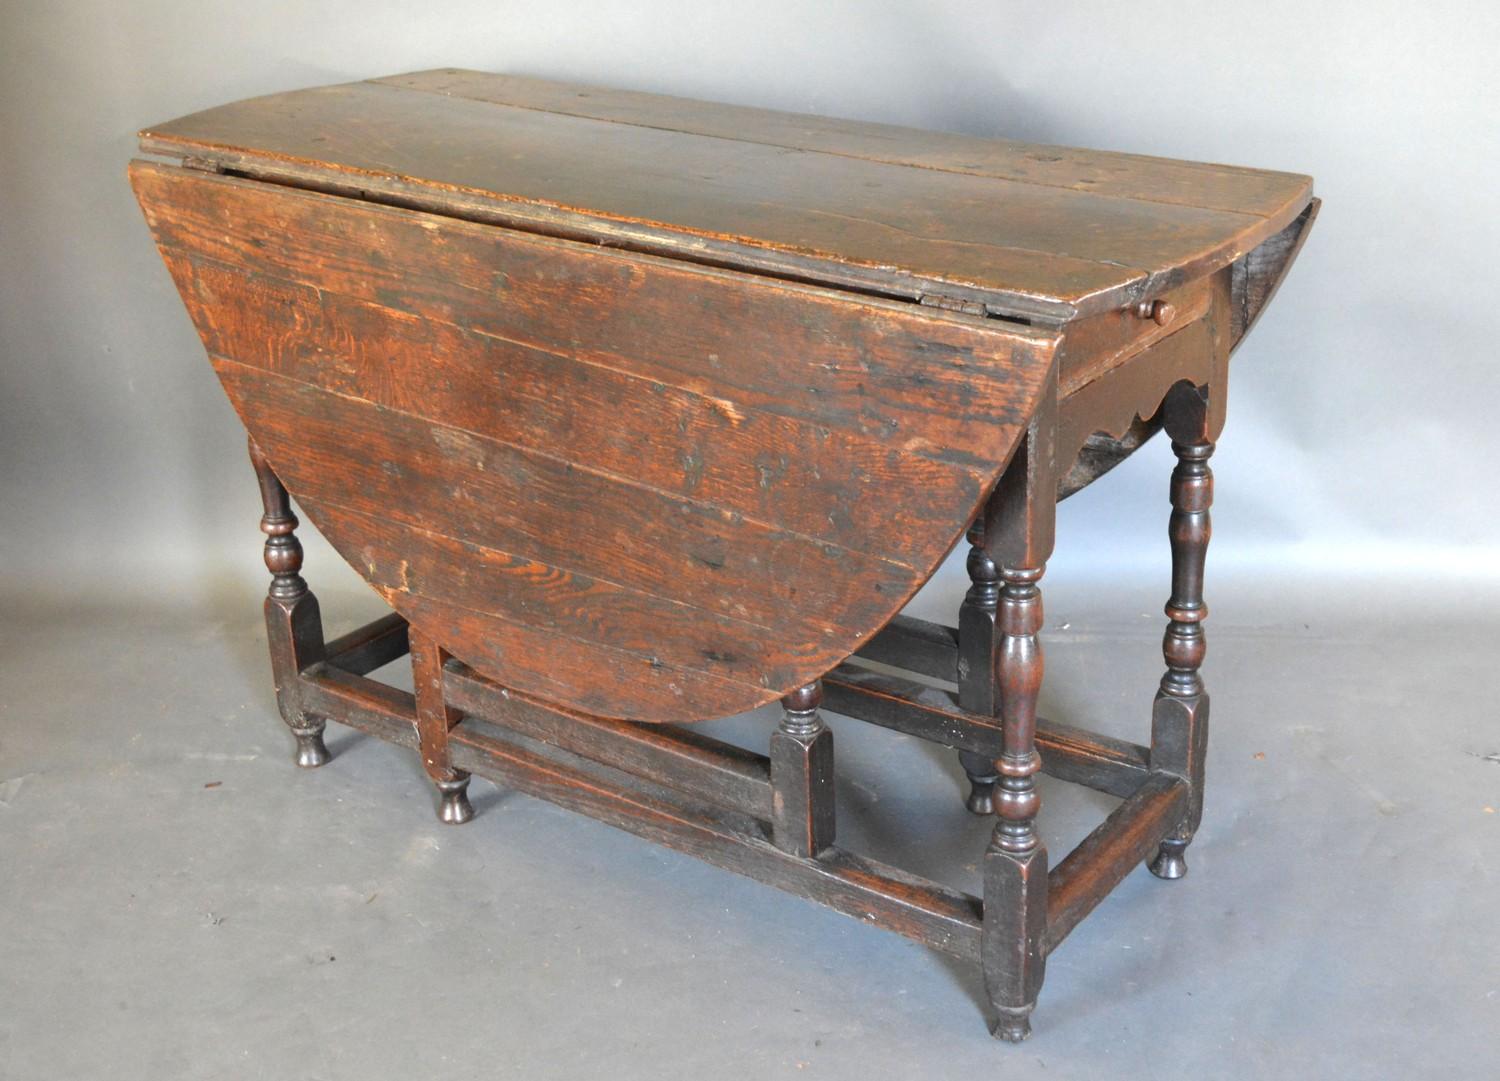 A George III Oak Oval Gate Legged Dining Table with a frieze drawer raised upon turned legs with